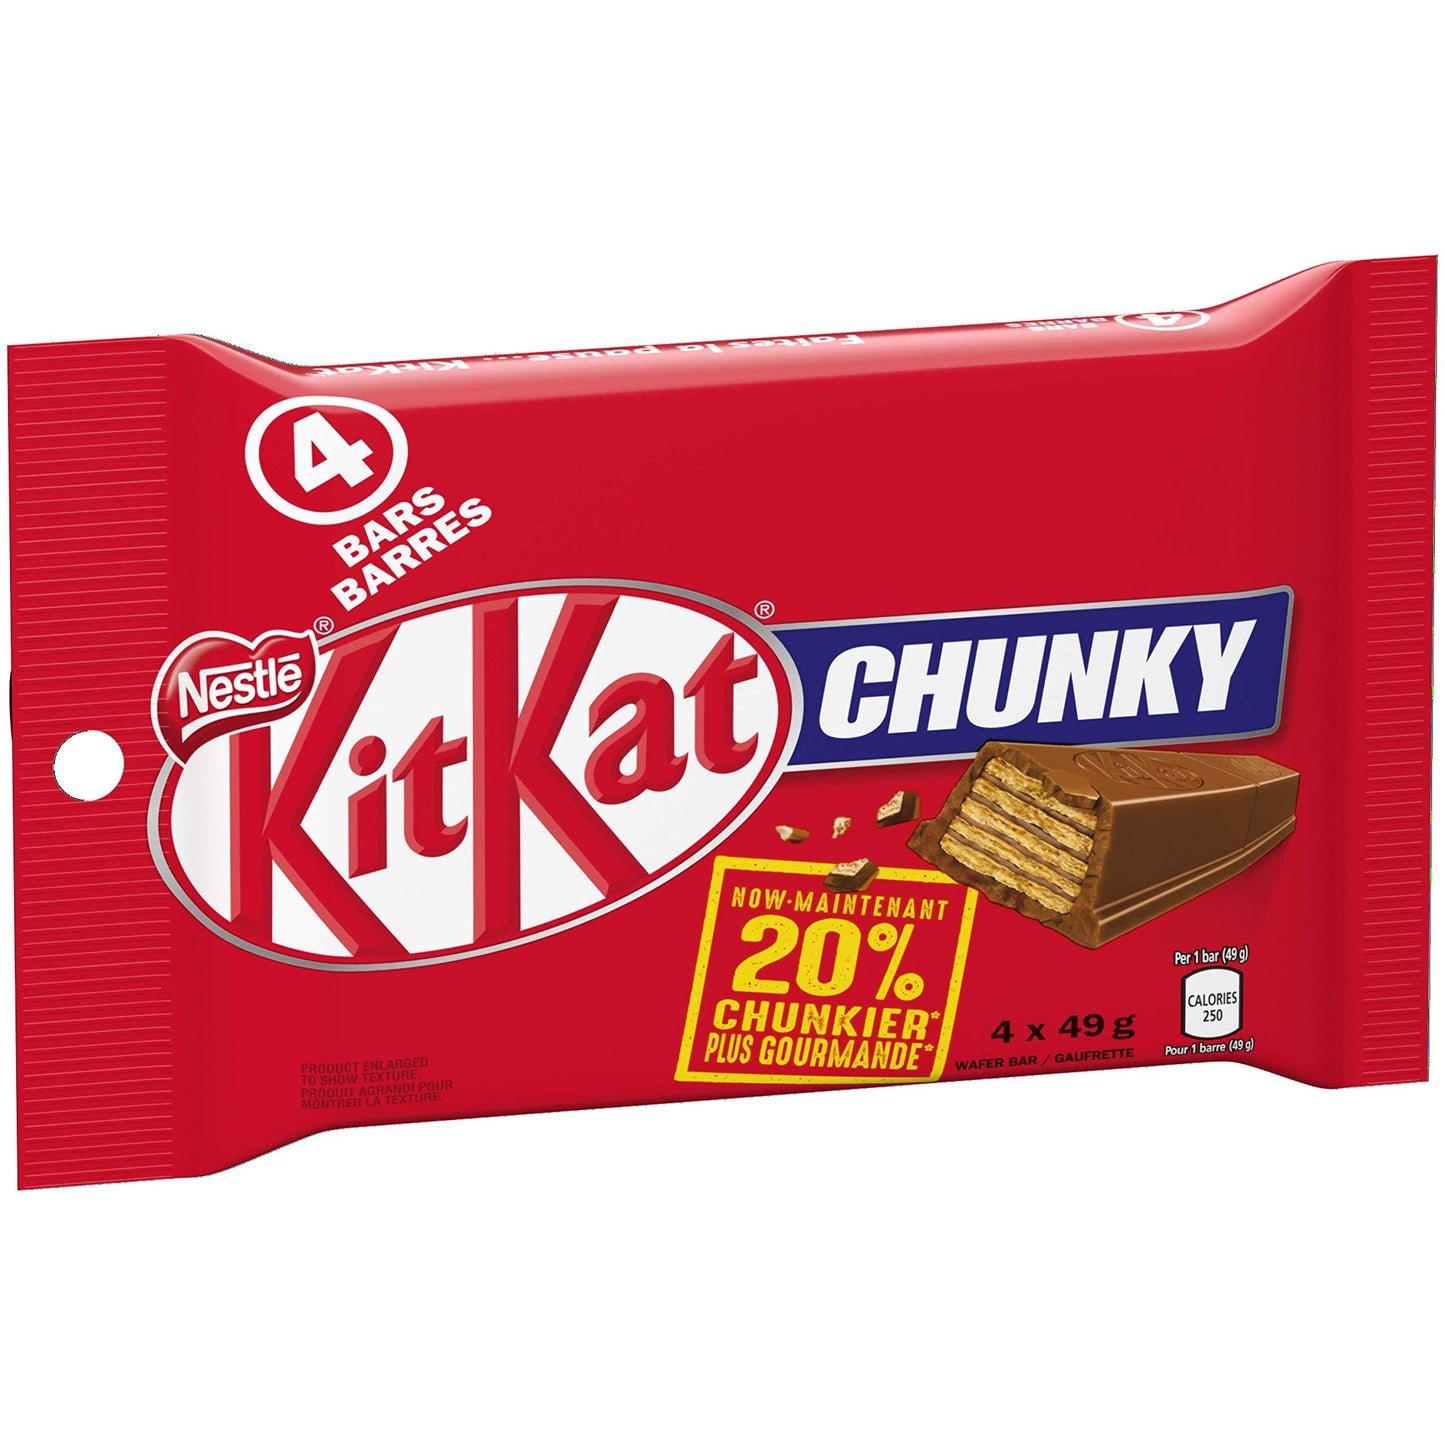 Kit Kat Chunky Chocolate Bars Multipack, 4 X 49g, 196g/6.9oz (Shipped from Canada)